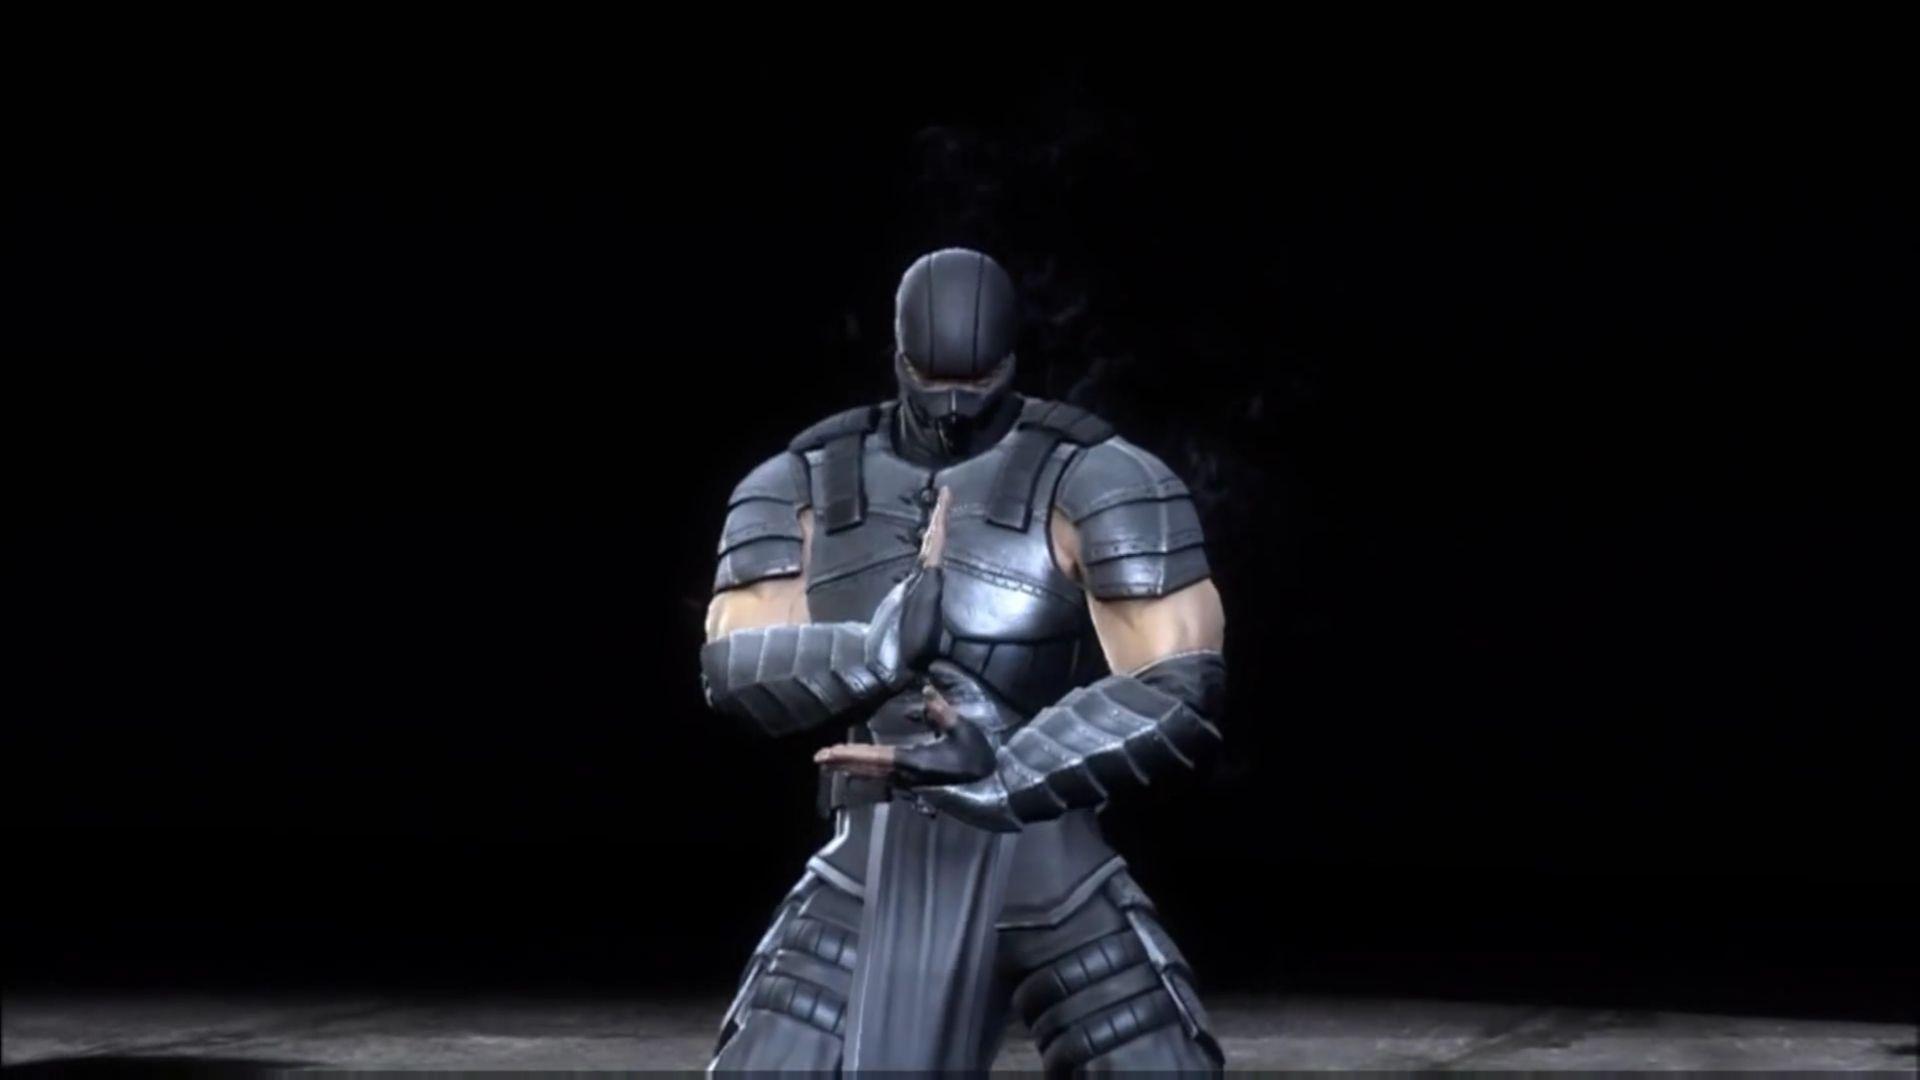 Mortal Kombat X characters that missed the cut